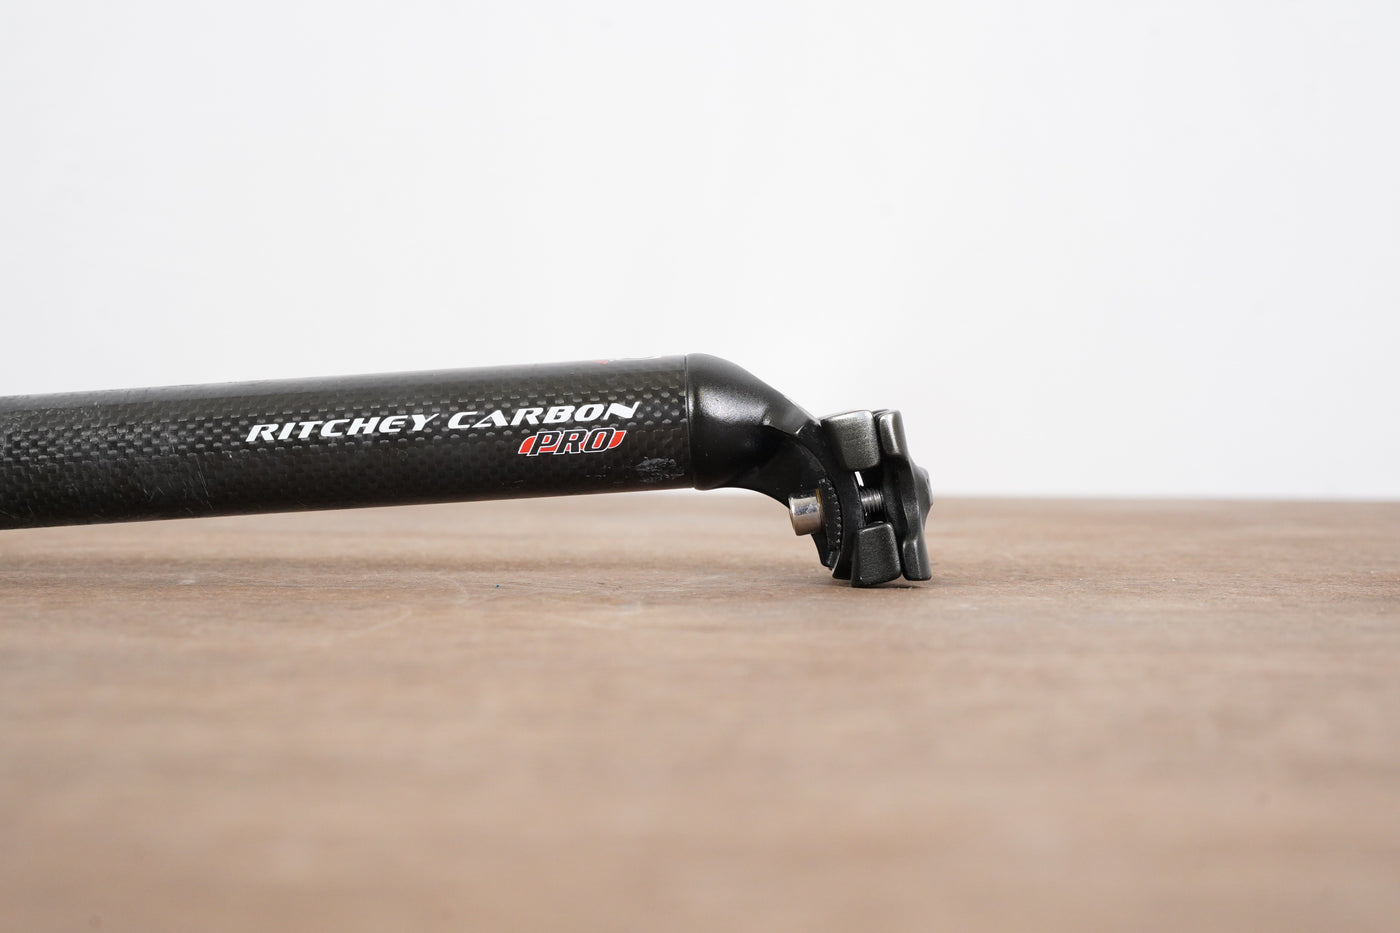 27.2mm Ritchey Pro Carbon Alloy Setback Road Seatpost 275g